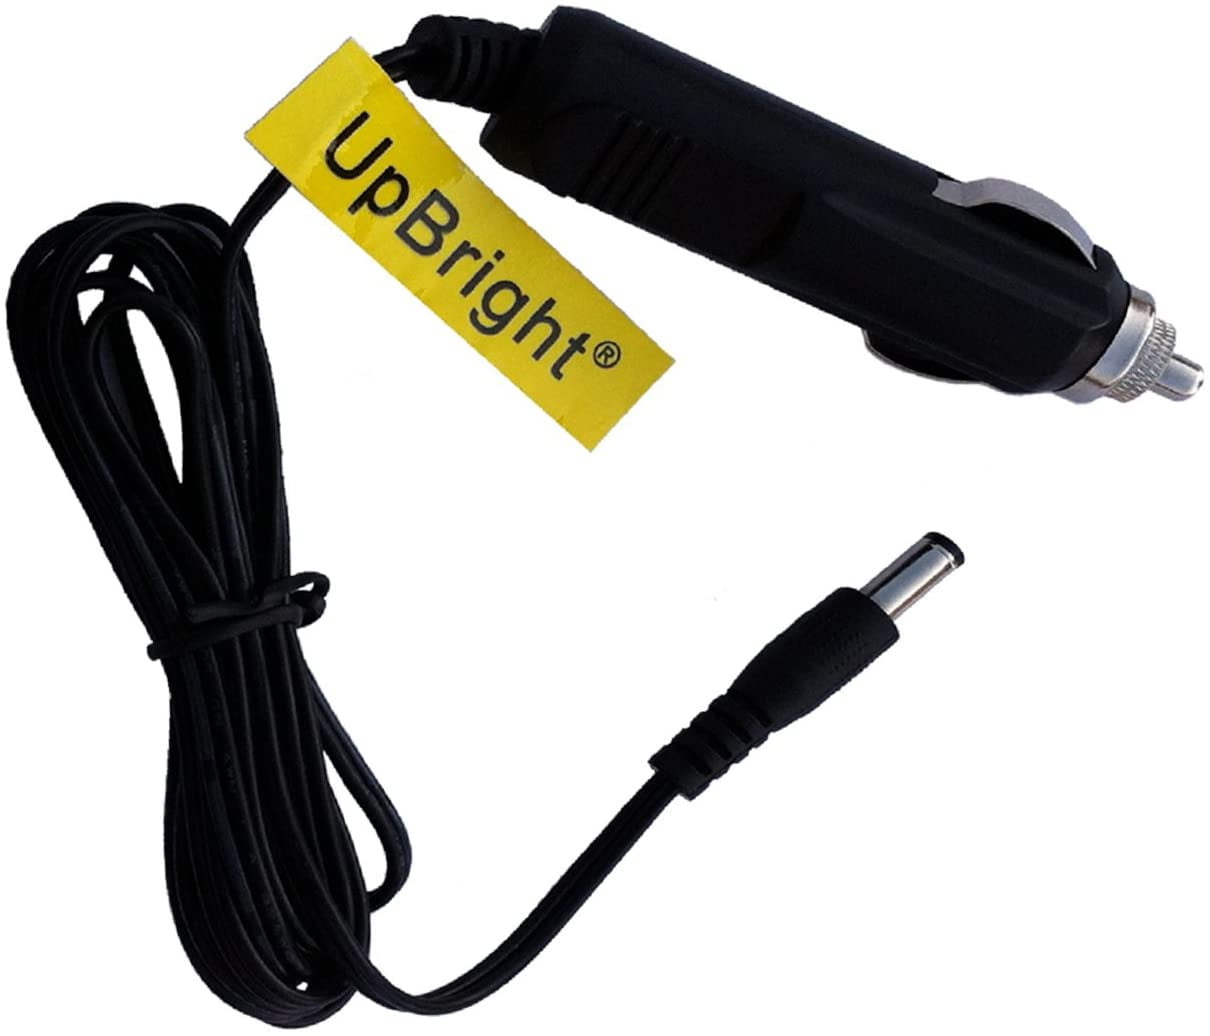 USB PC Charger Cable Power Cord For Axess SPBT1034 Portable Bluetooth Speaker 